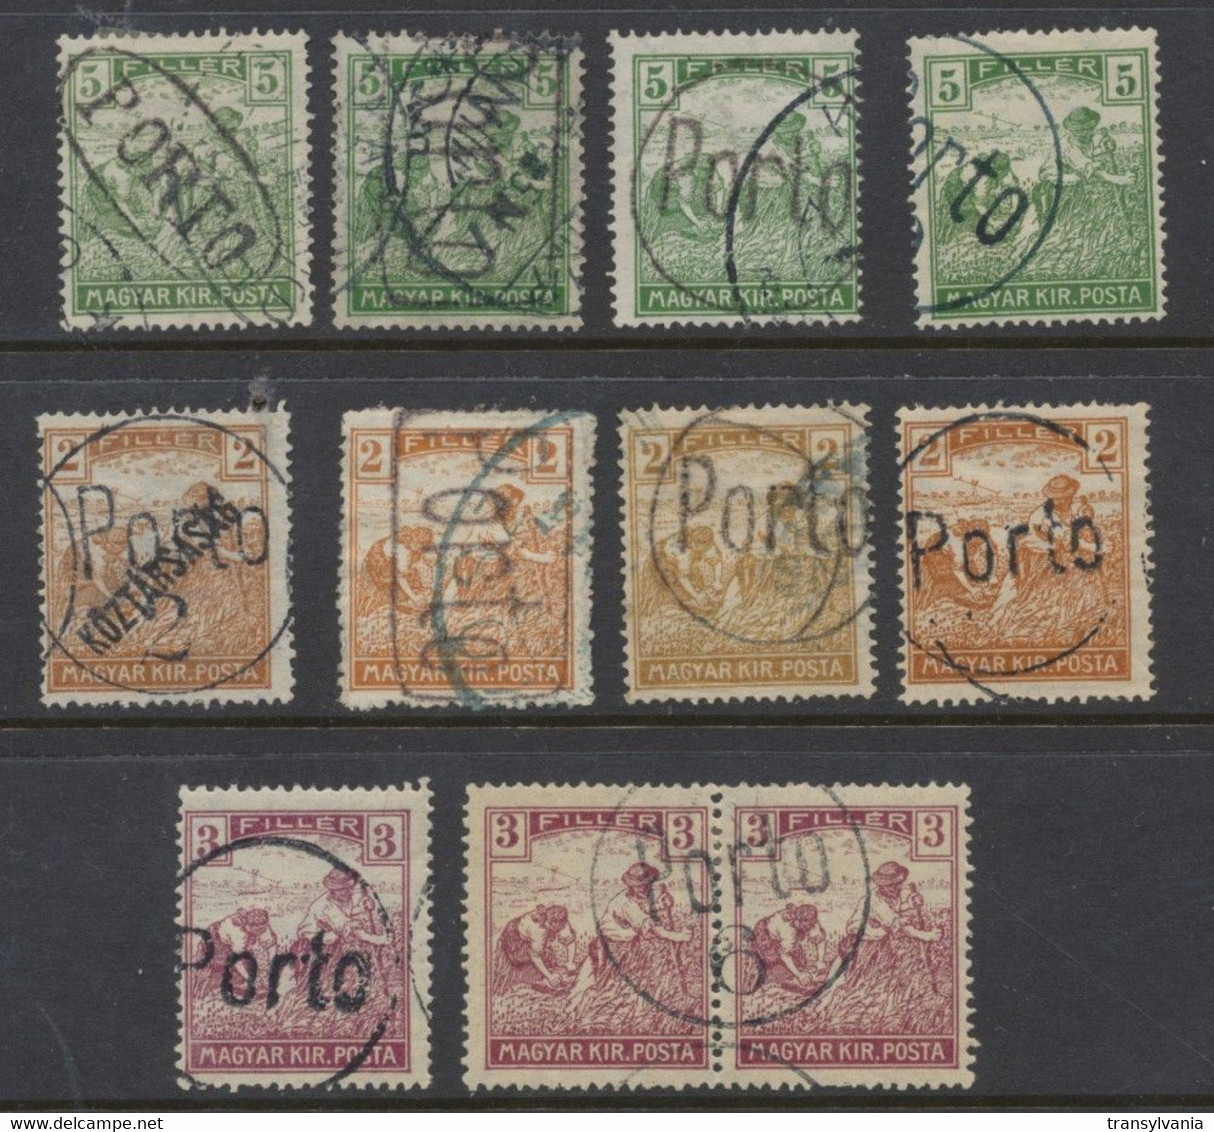 Hungary 1919 Lot Of 11 Definitive Stamps With Local Postage Due PORTO Different Types Of Overprints - Variedades Y Curiosidades